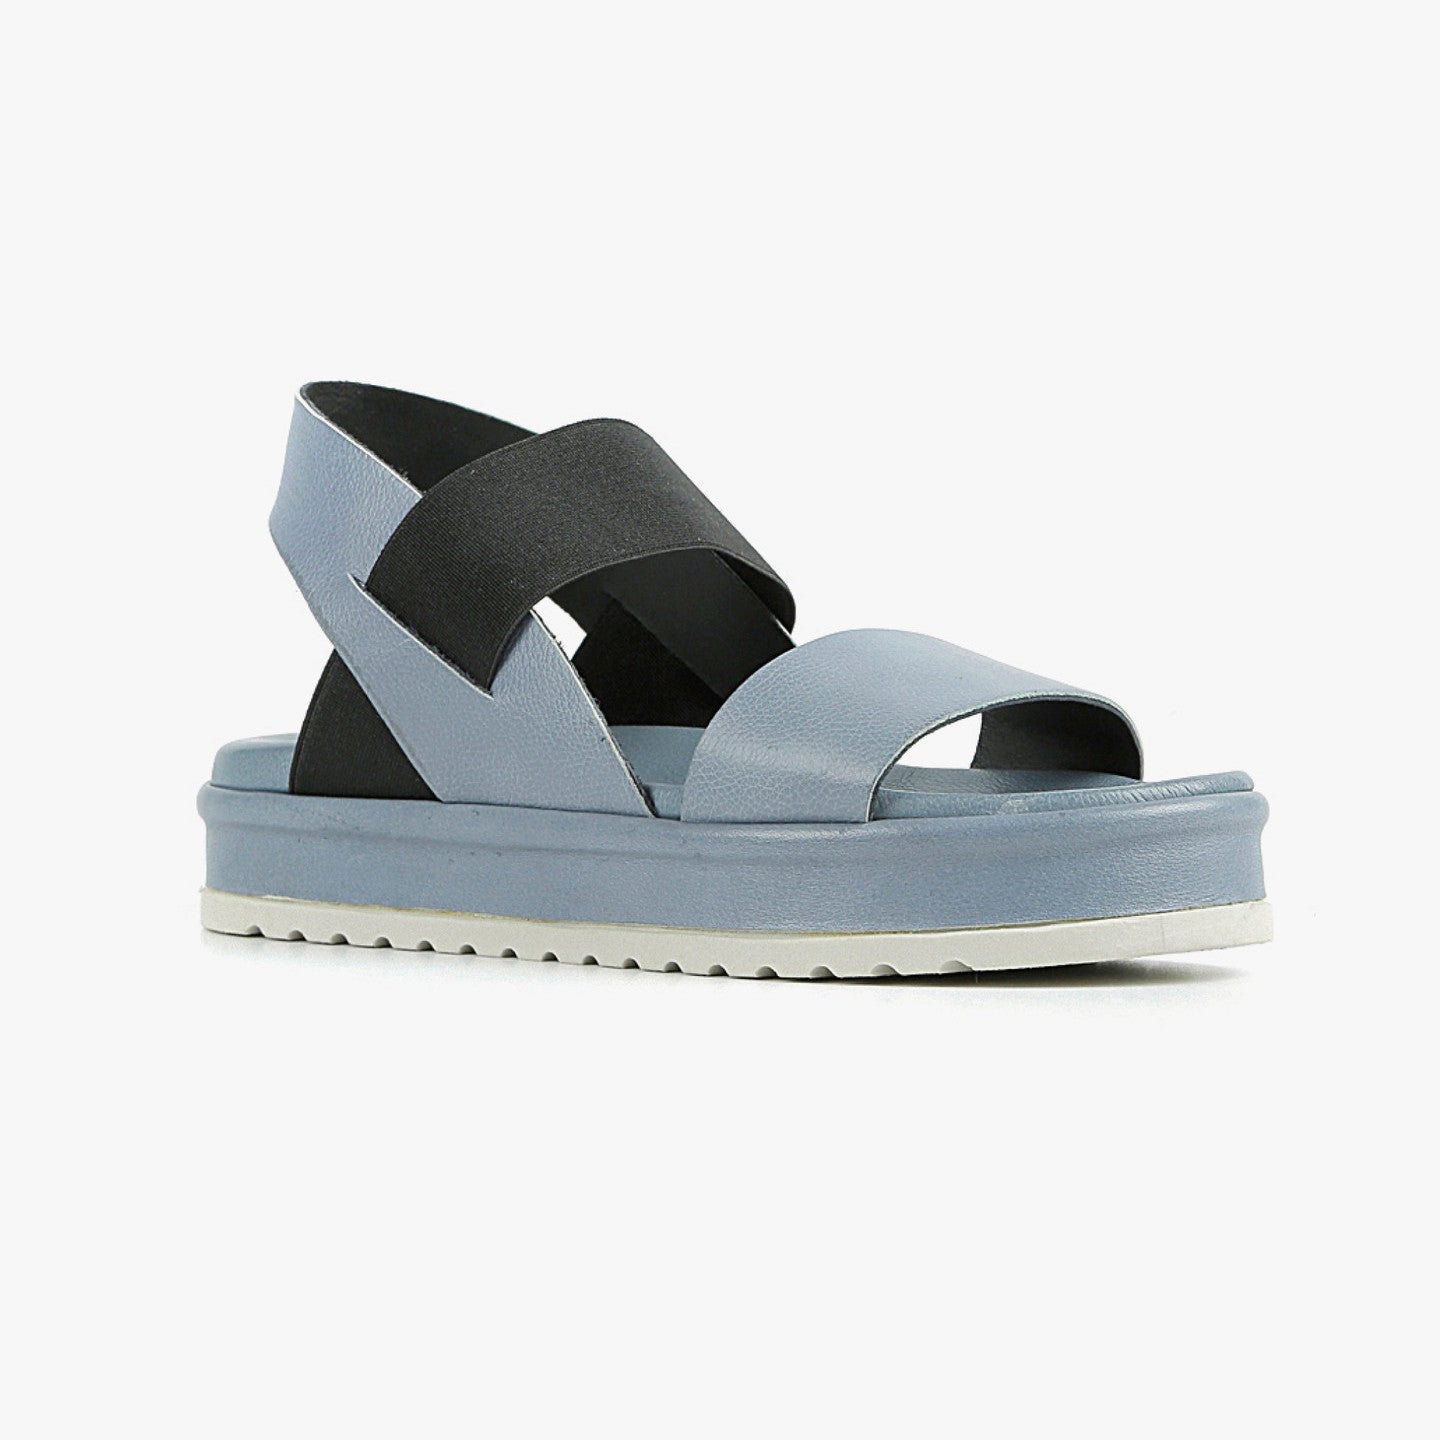 outer view of the all black banded trekker. This sandal has a strap over the toe bed and behind the heel with a black elastic strap over the instep. The rest of the shoe is a blue leather. 